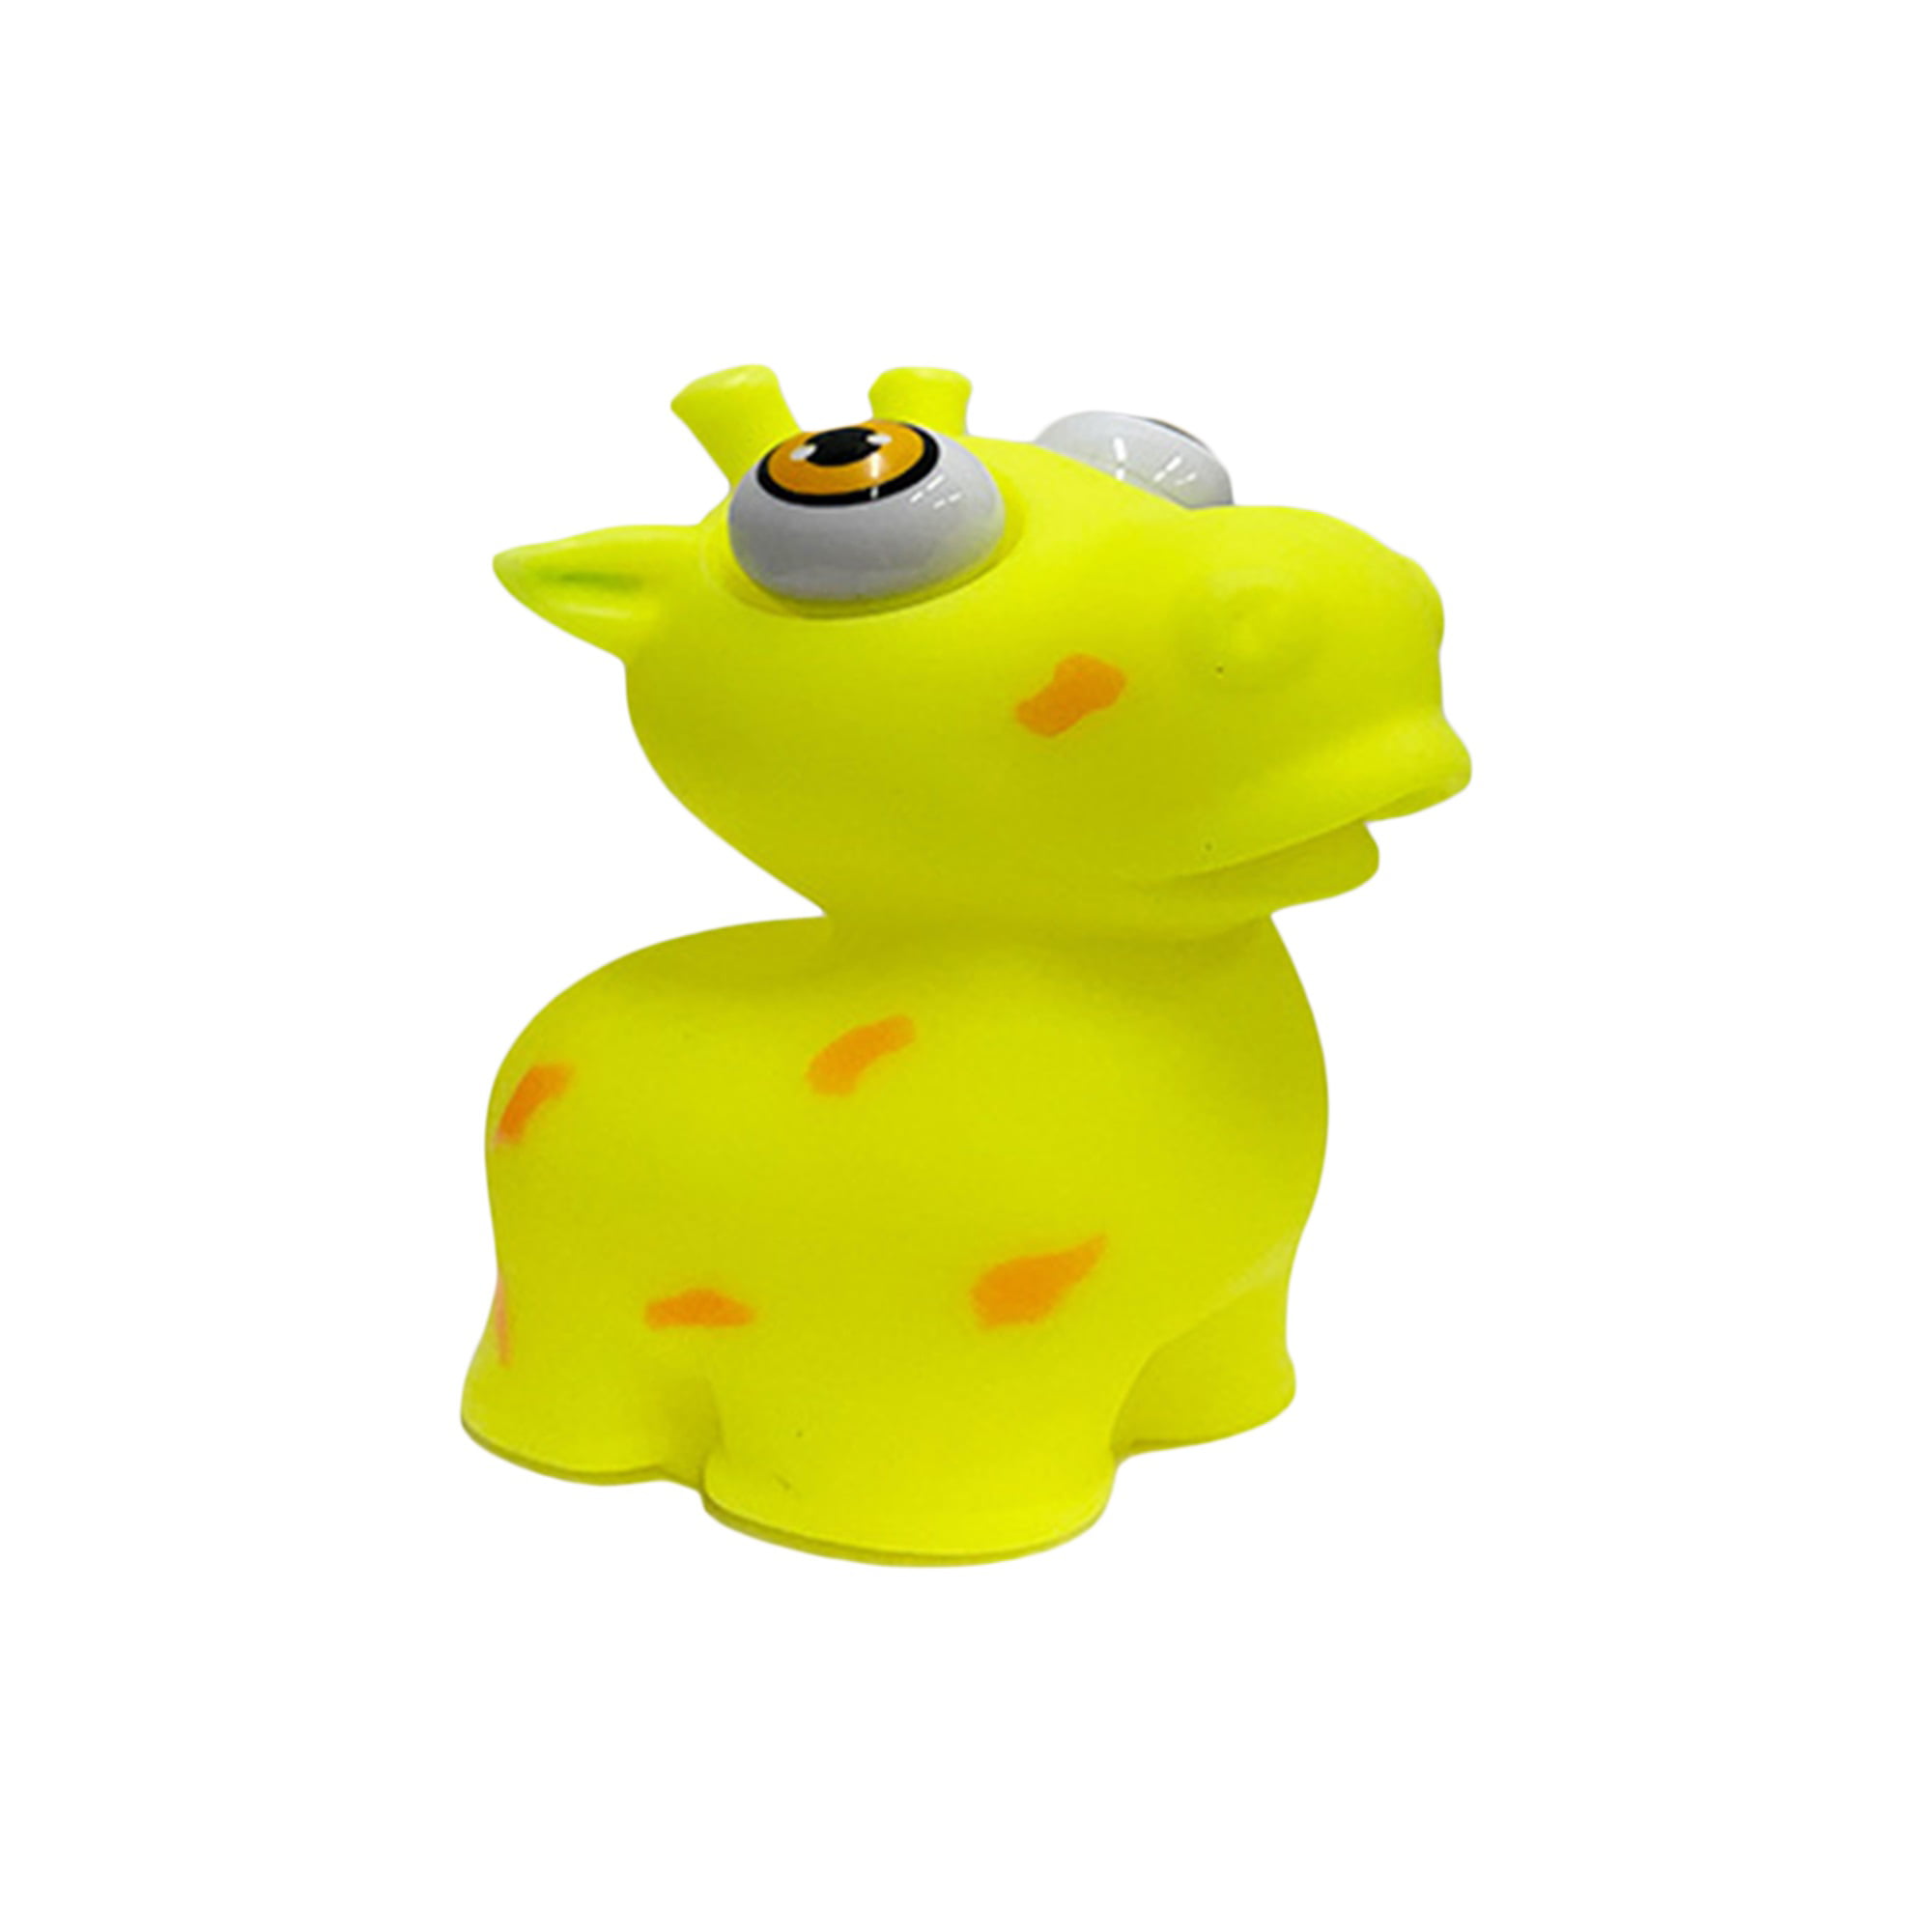 Stretchy 14 cm Frog Animal Squishy Model Spoof Stress Relief Squeeze ADHD 